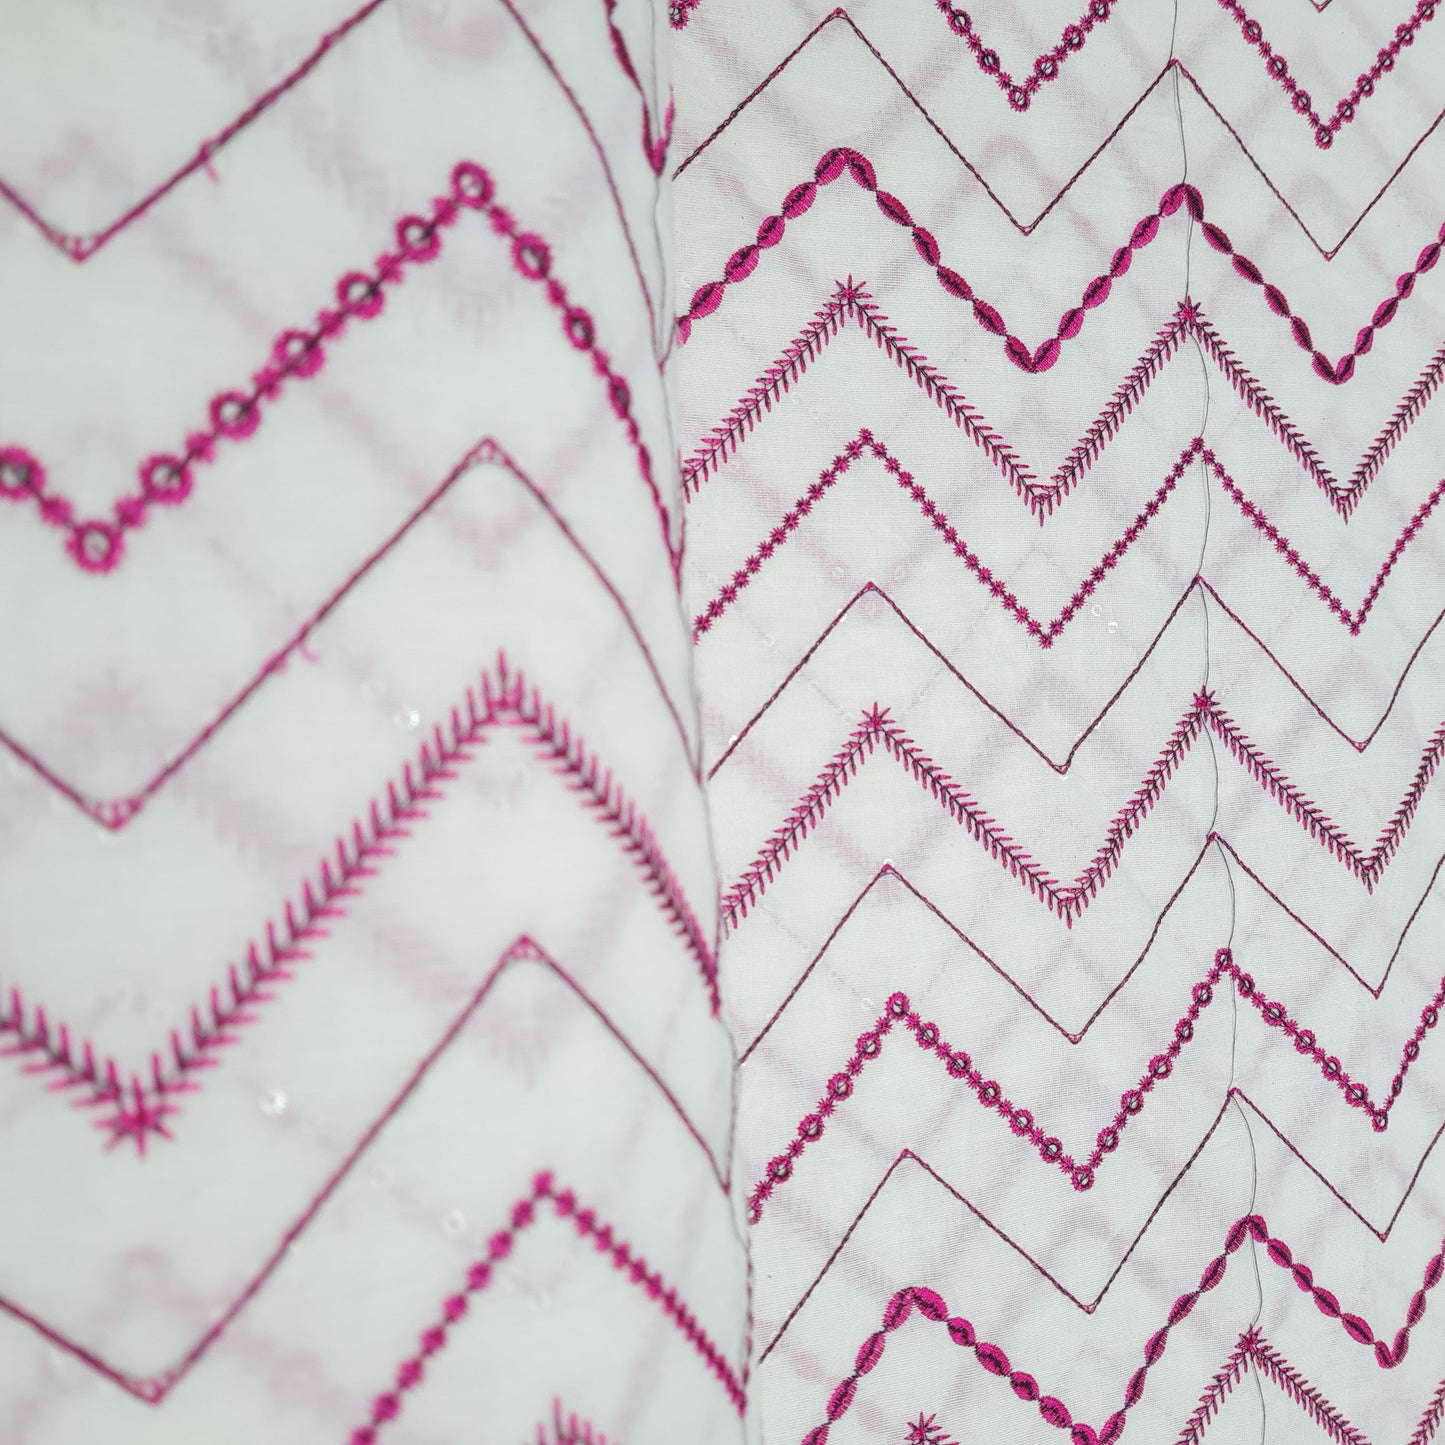 Griege & Pink Chevron Sequence Thread Embroidery Cotton Fabric